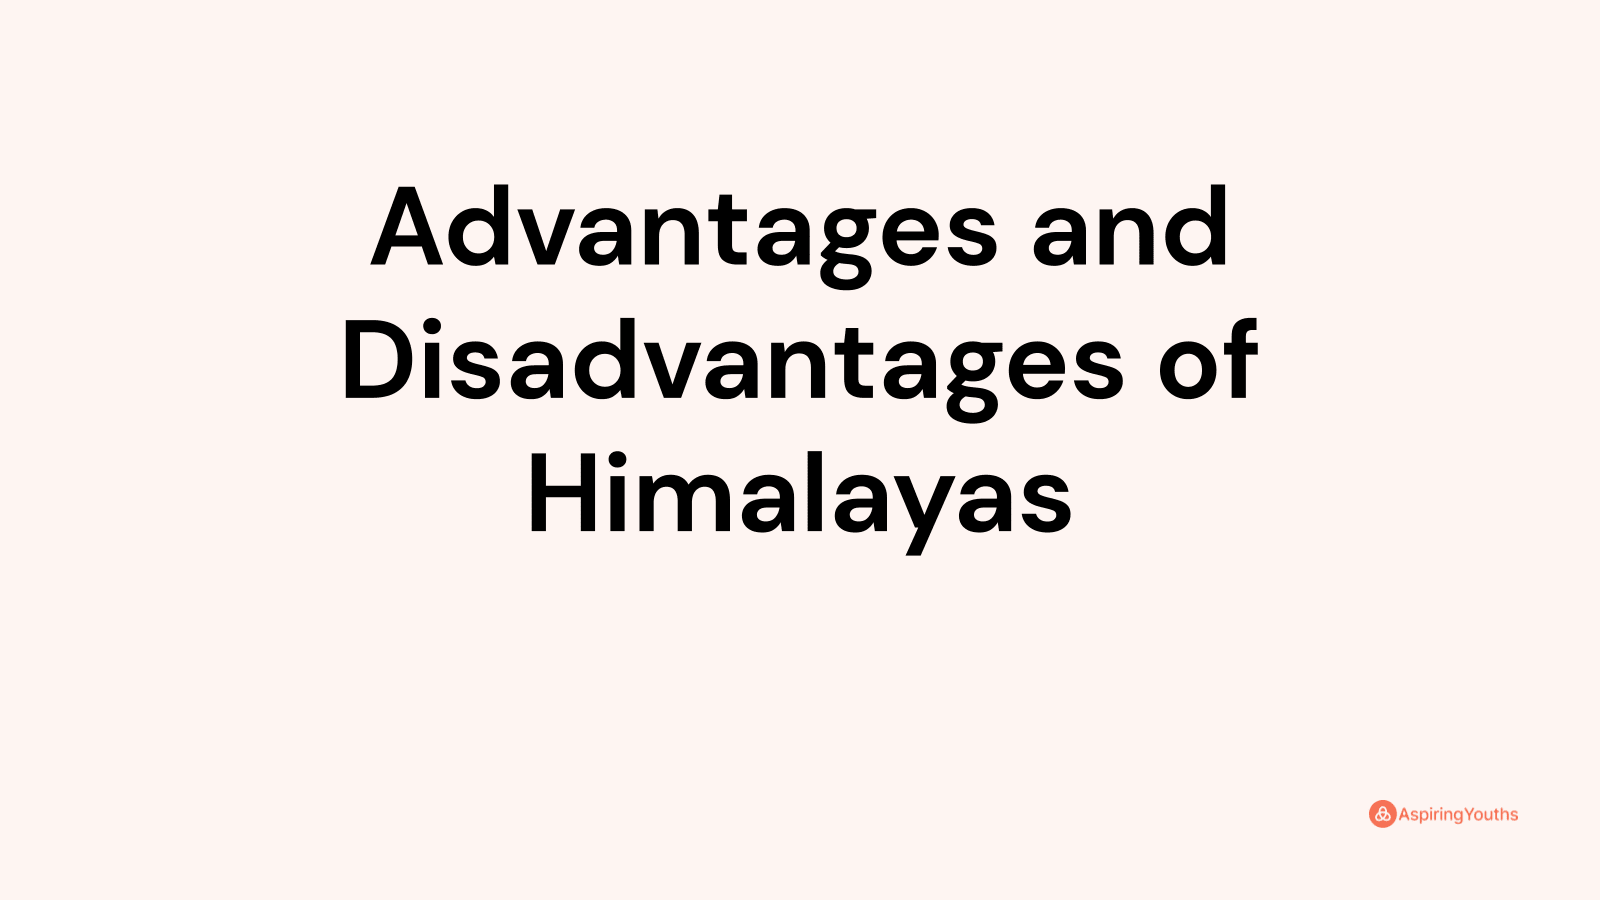 Advantages and disadvantages of Himalayas